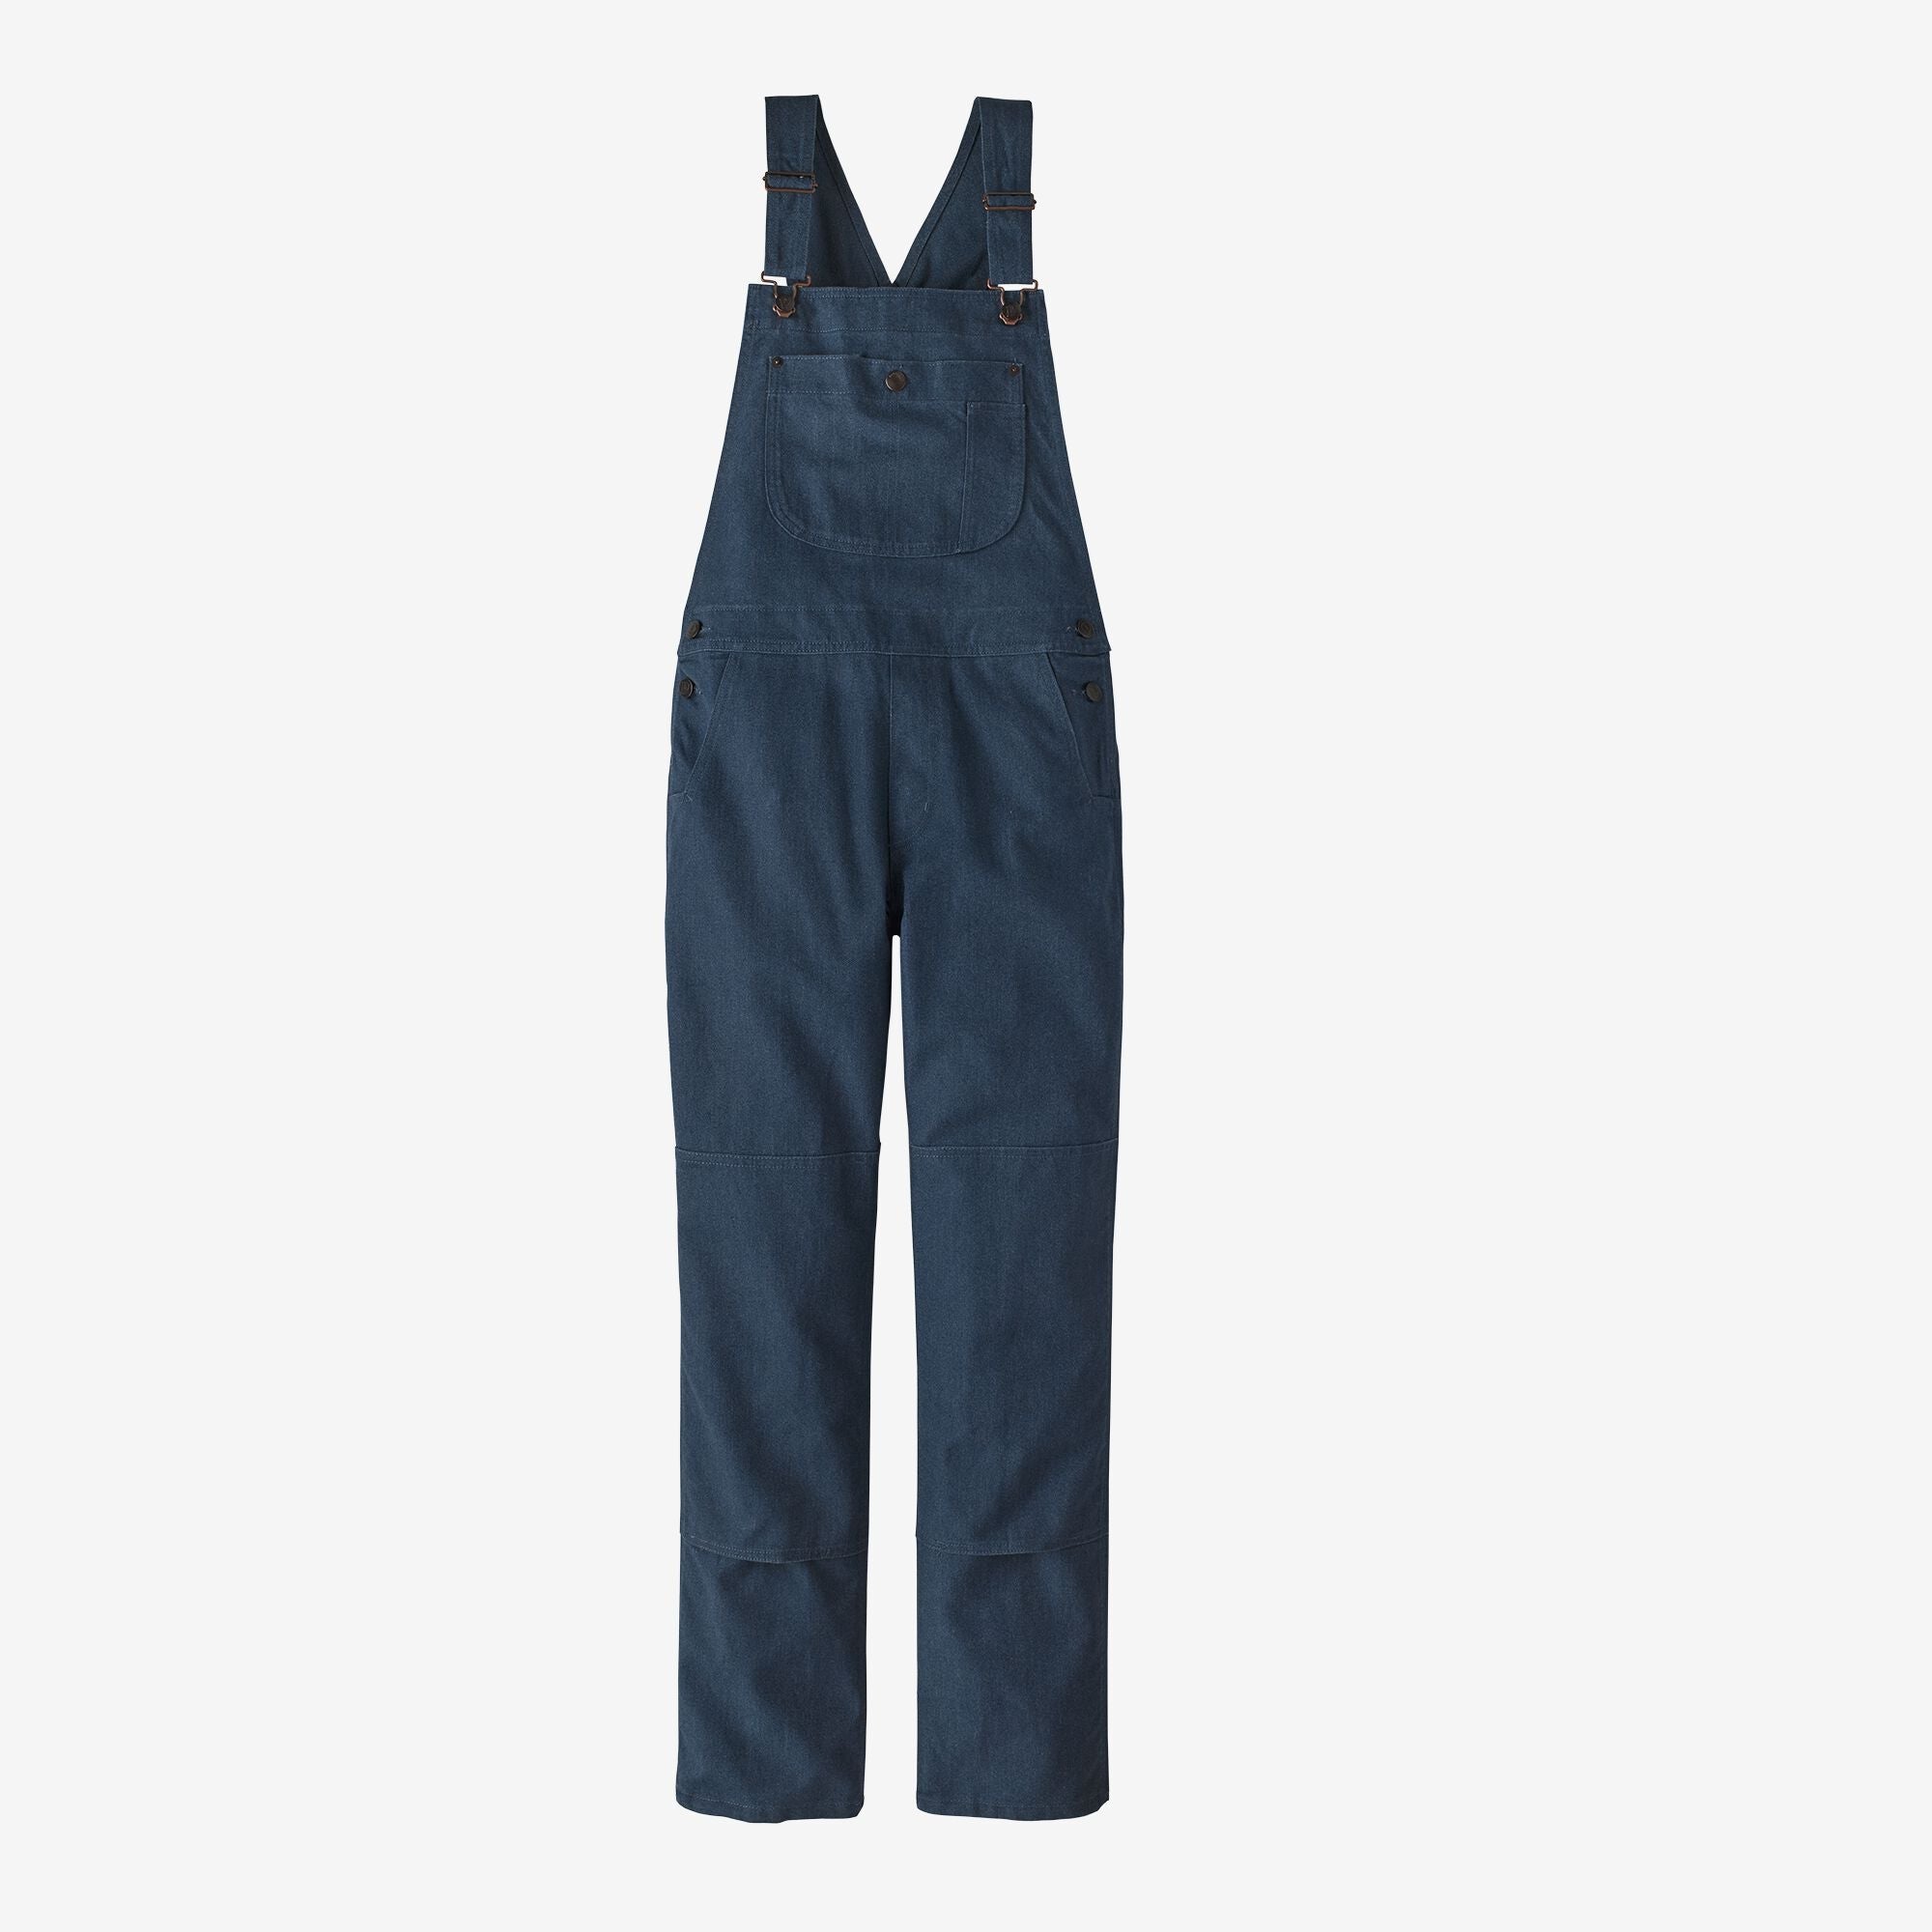 discount 87% WOMEN FASHION Baby Jumpsuits & Dungarees NO STYLE Navy Blue S Zara jumpsuit 